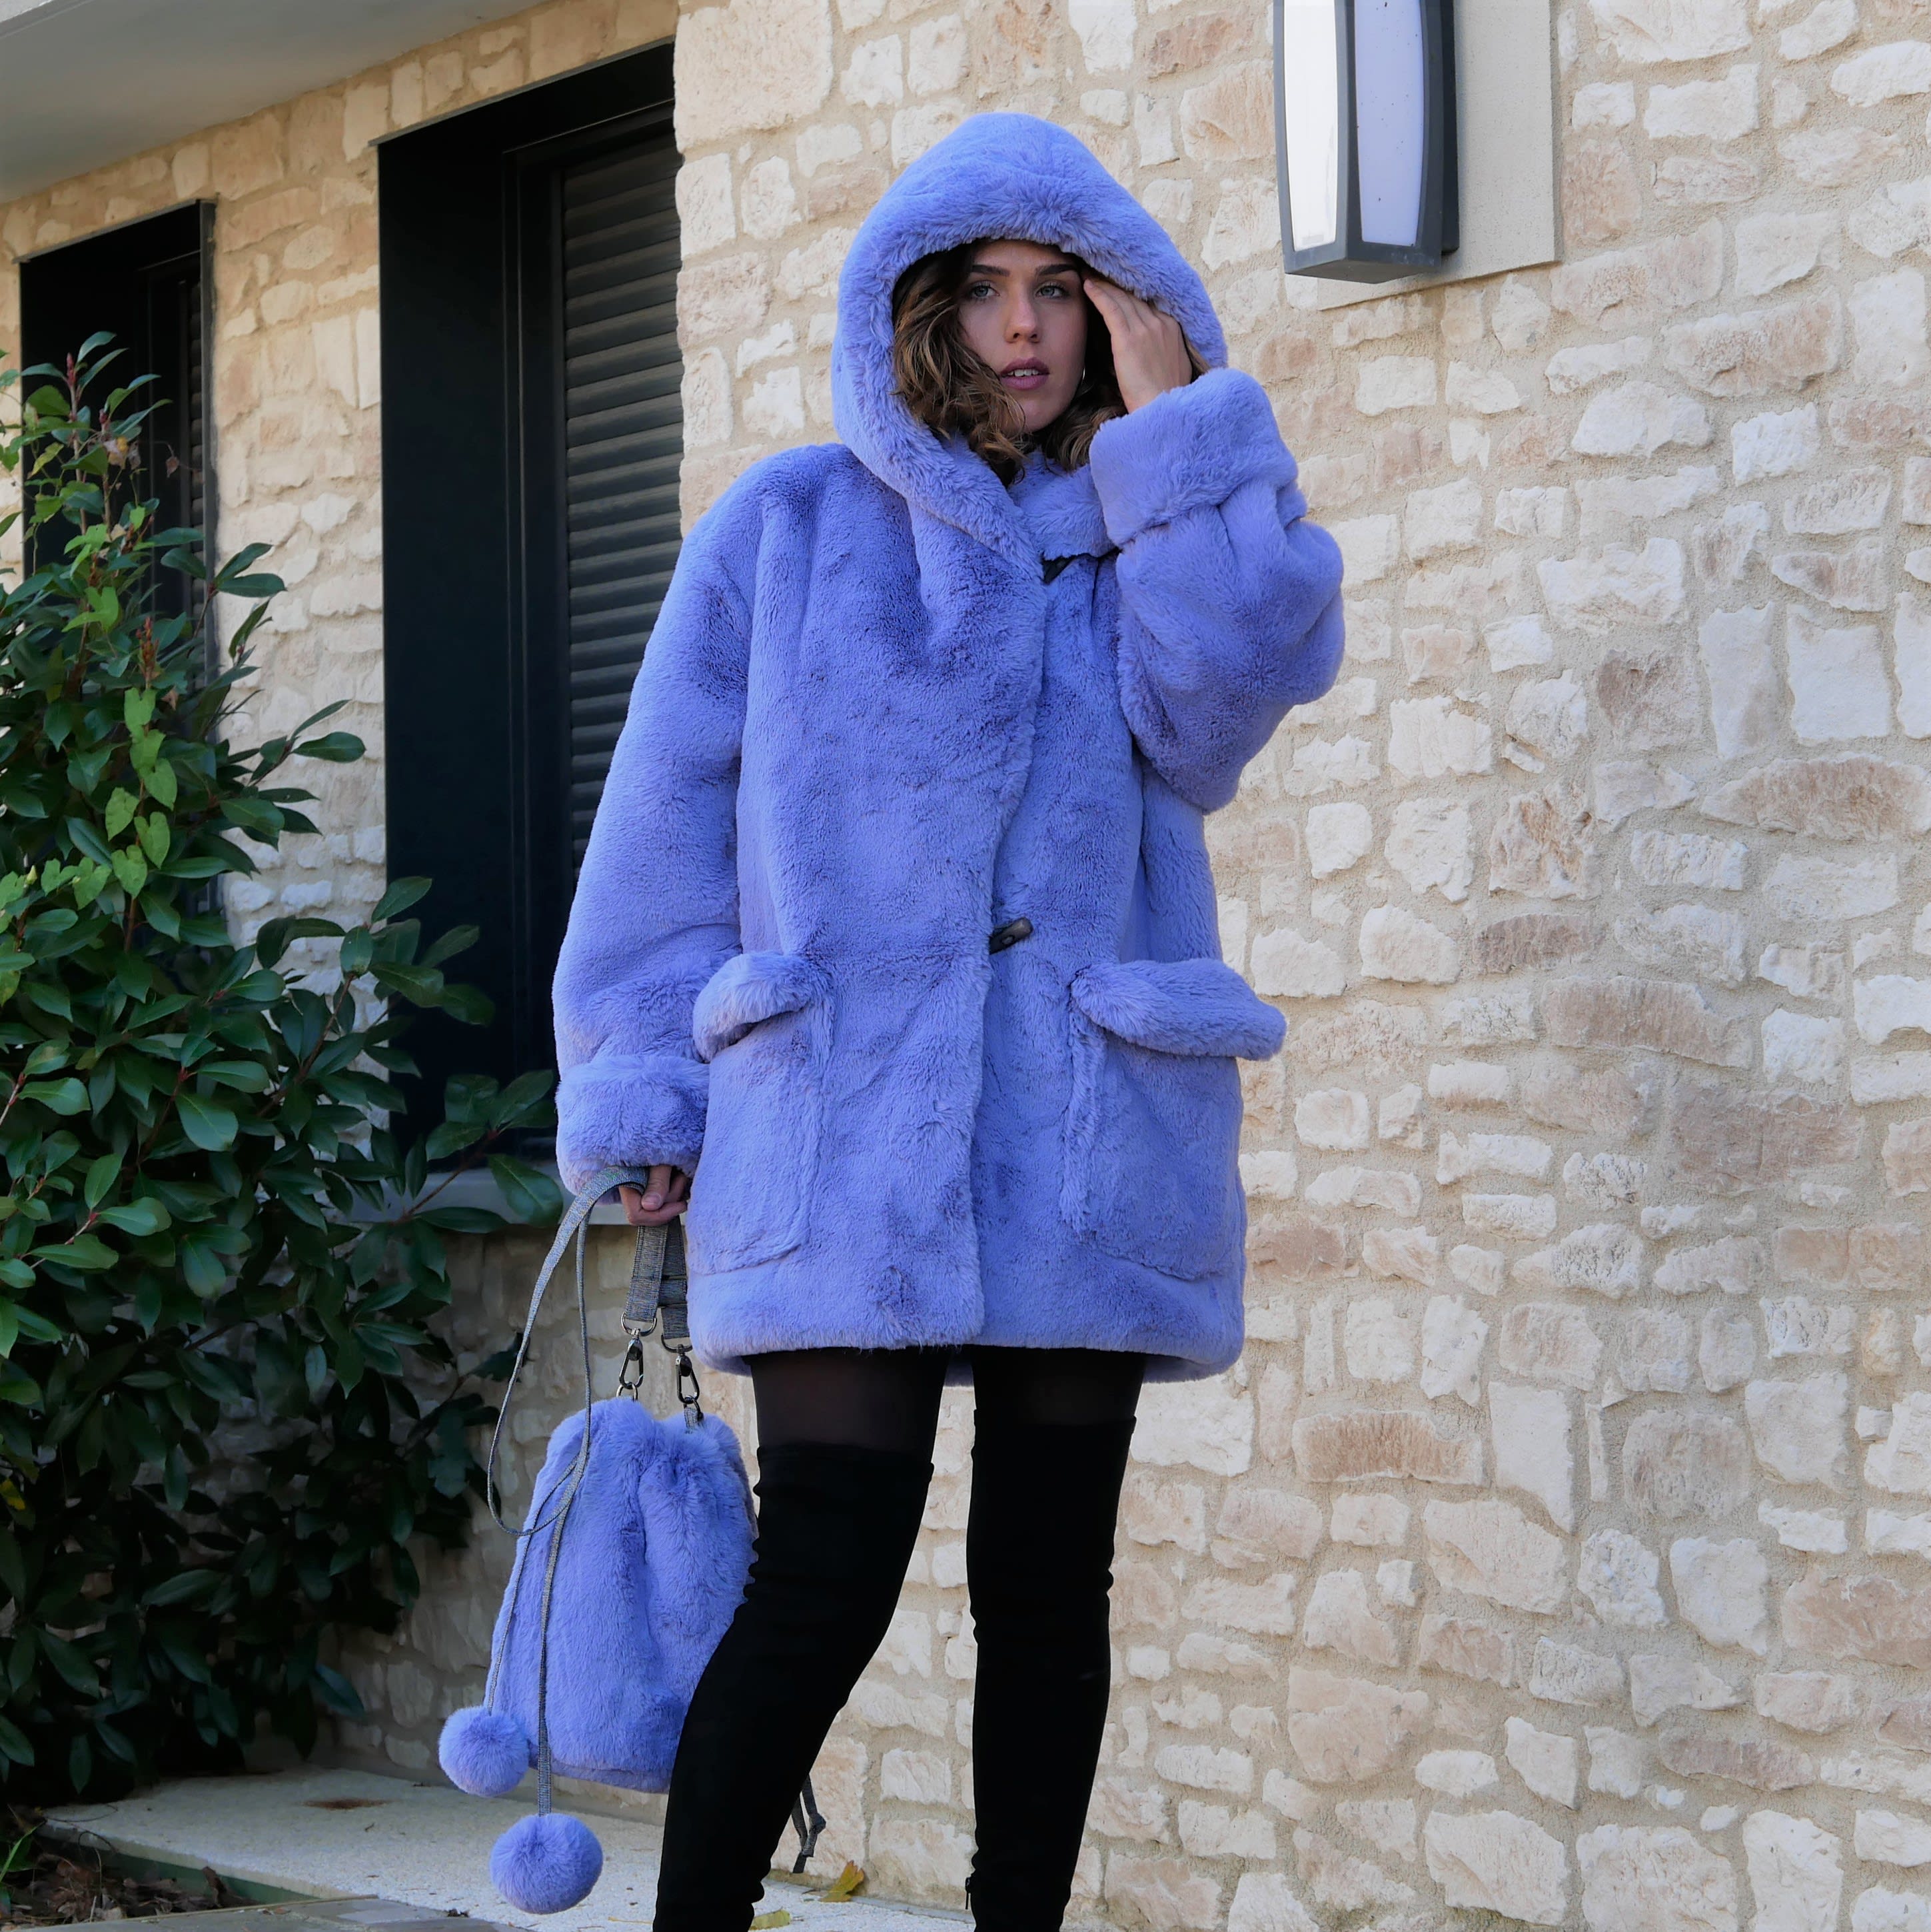 Fur coat with hood, blue purple lavender faux fur duffle coat, very warm, chic and washable.